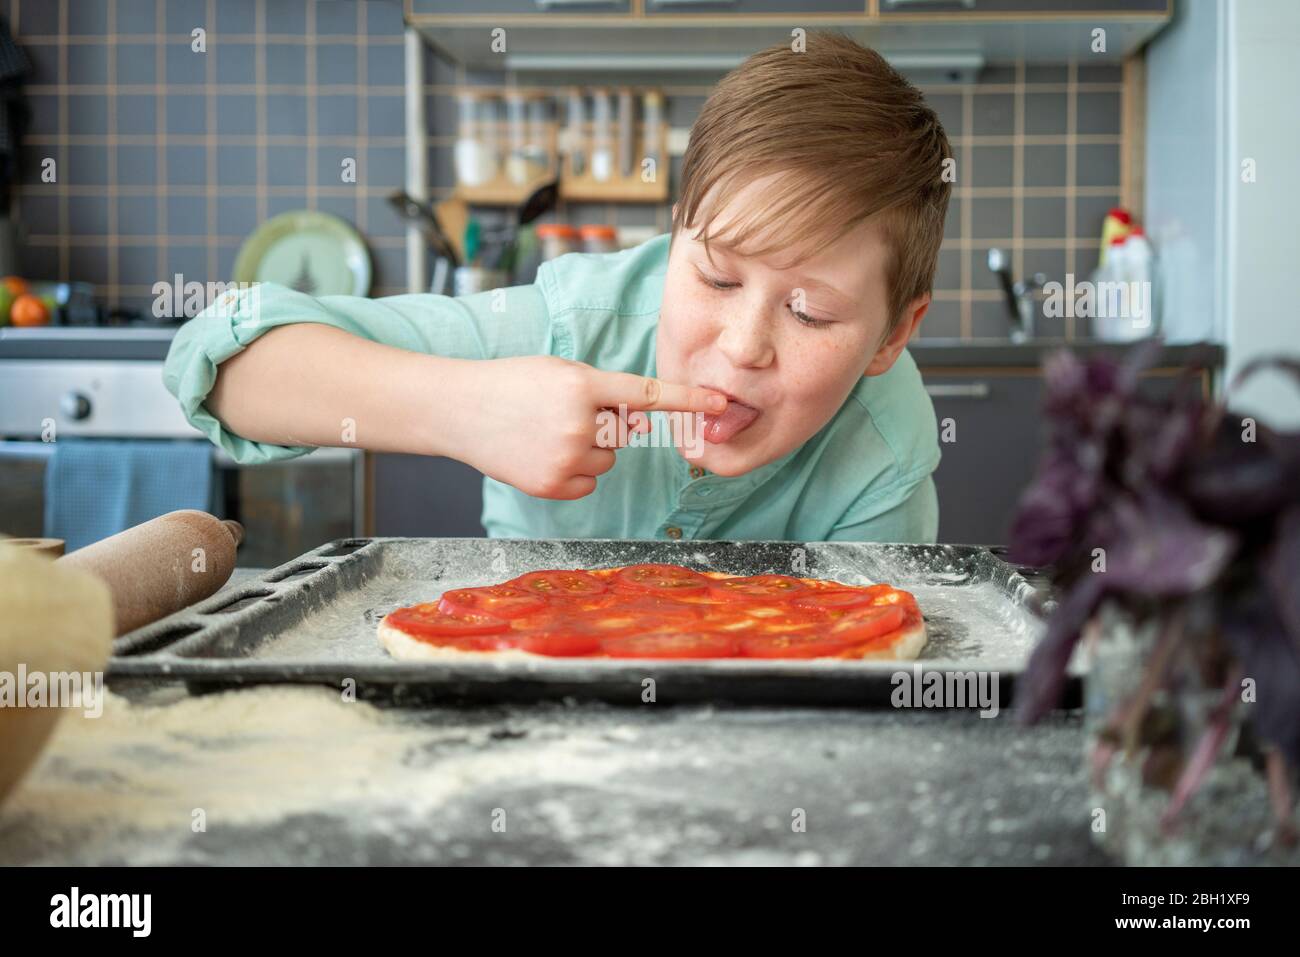 Portrait of boy nibbling tomato sauce in kitchen Stock Photo